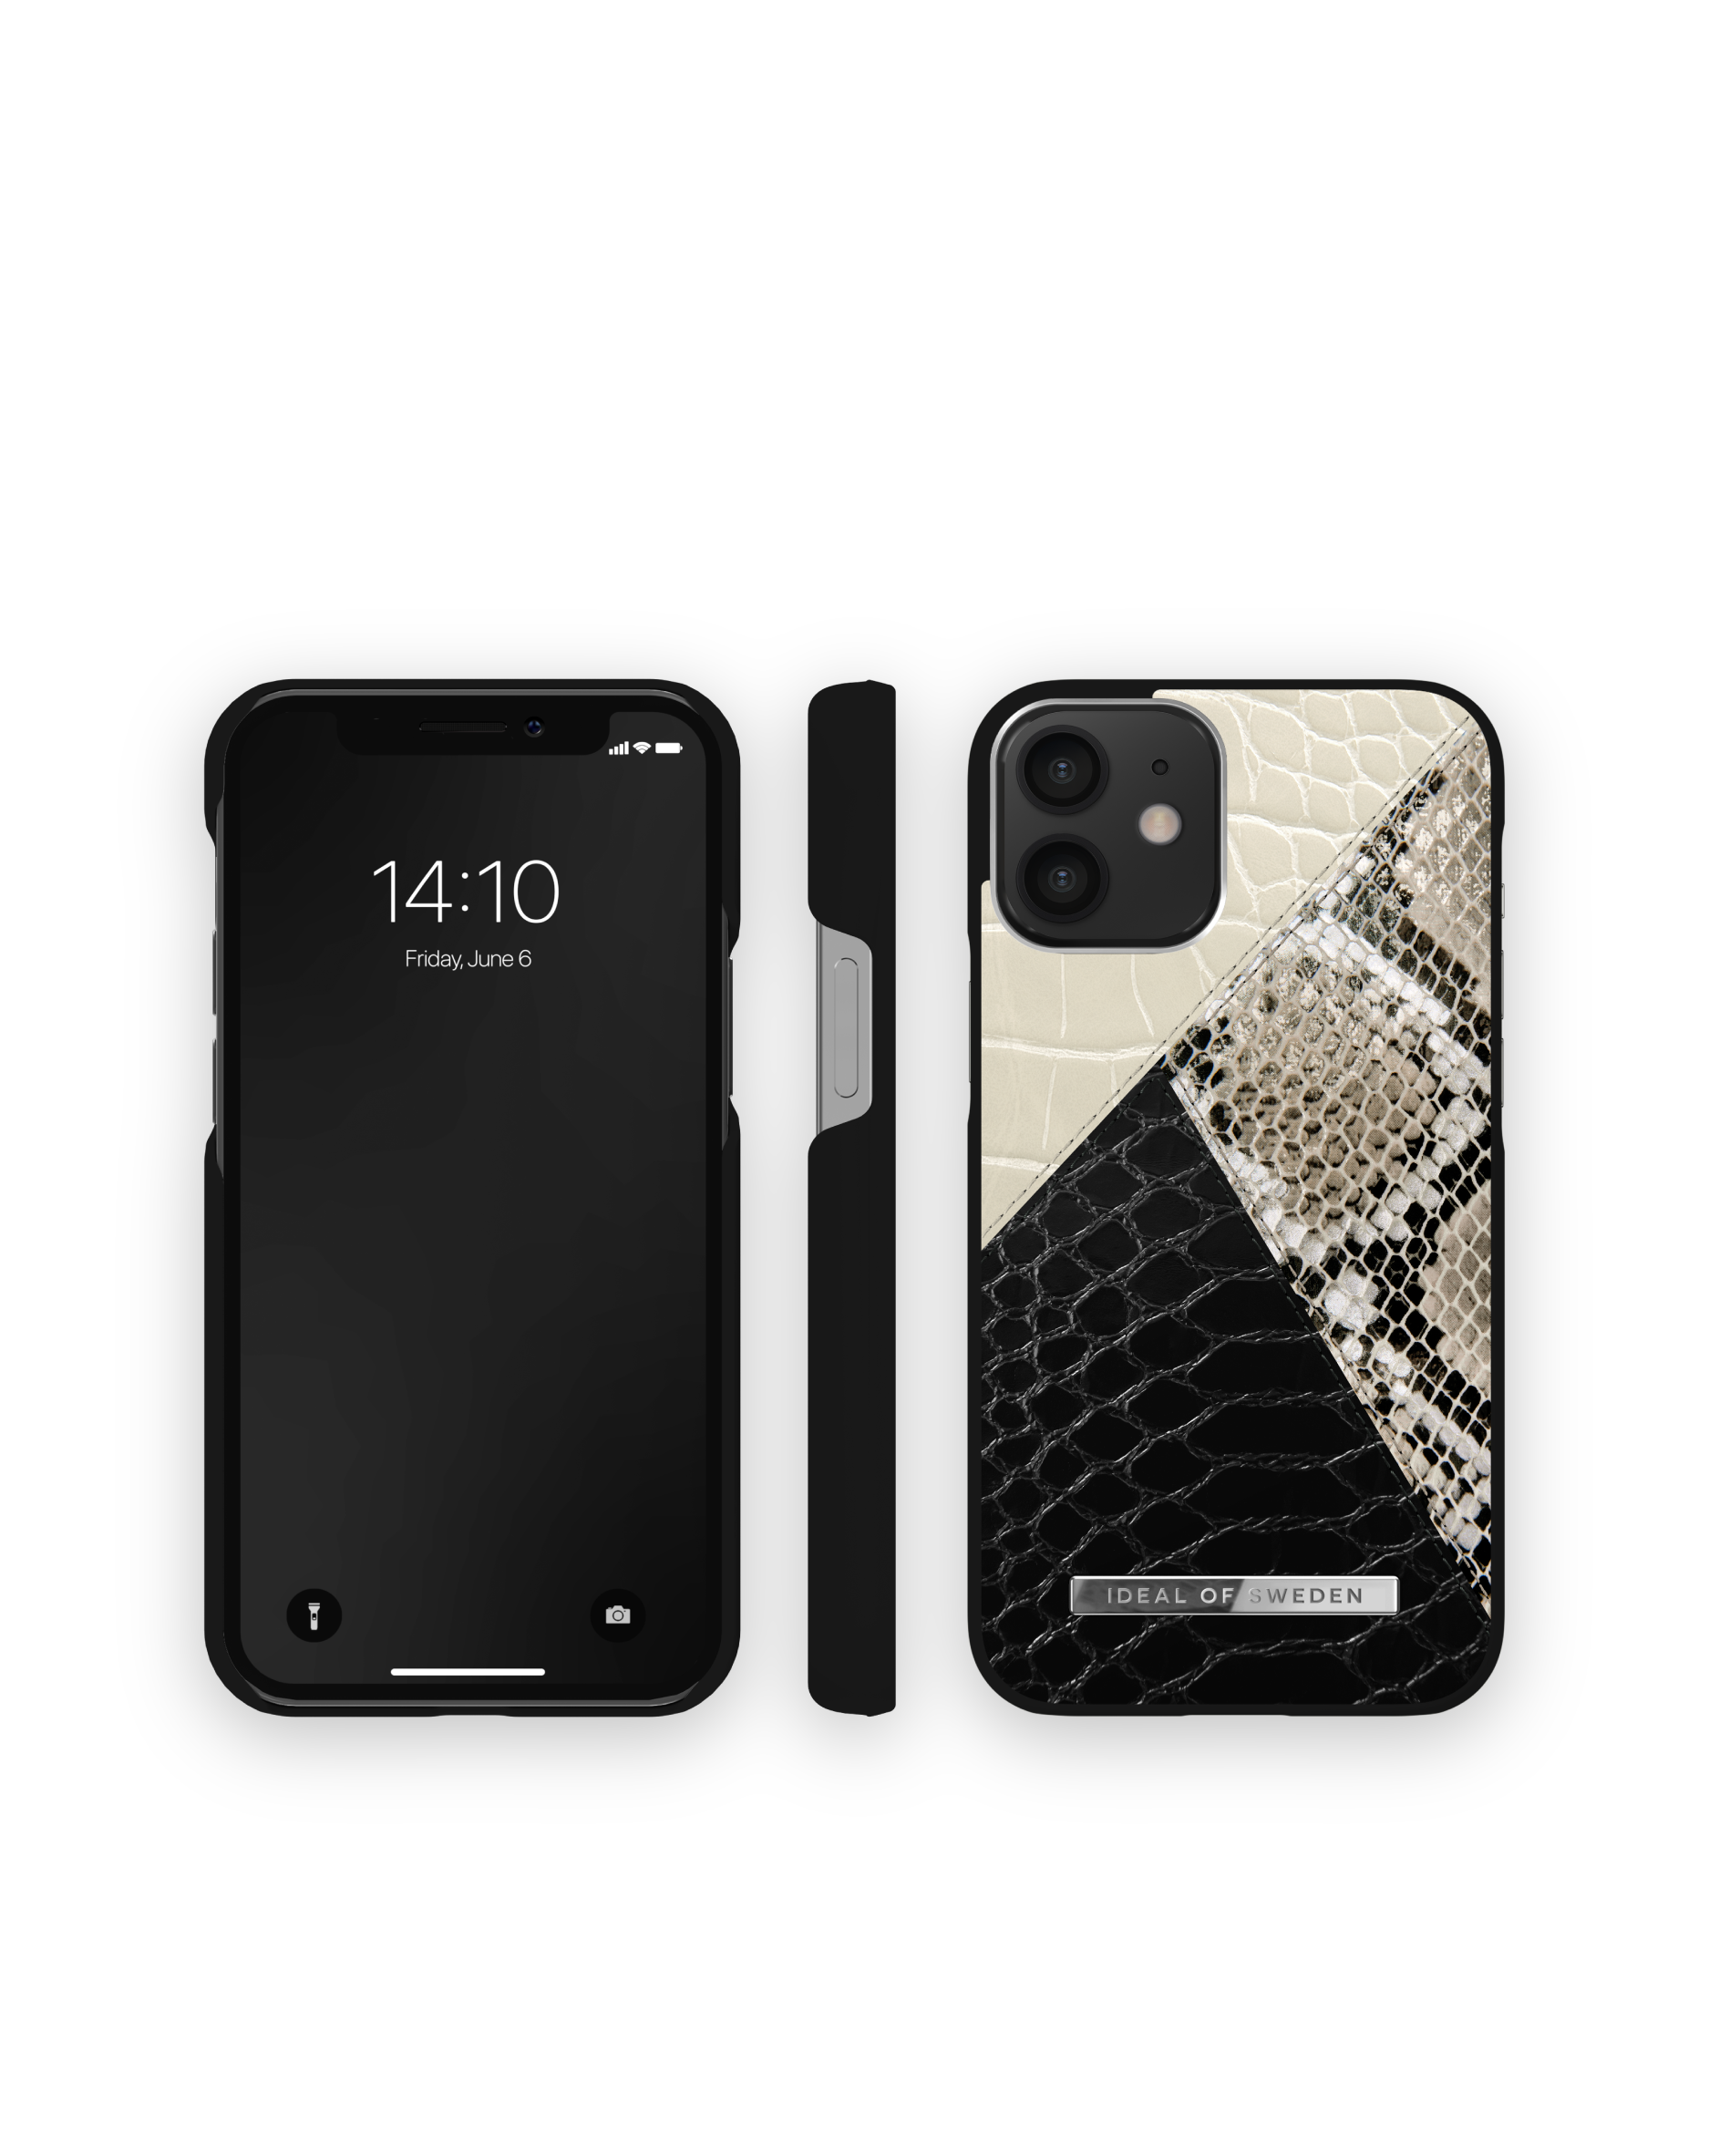 IPhone Night 12 SWEDEN Sky Backcover, IDEAL mini, Snake IDACSS21-I2054-271, OF Apple,